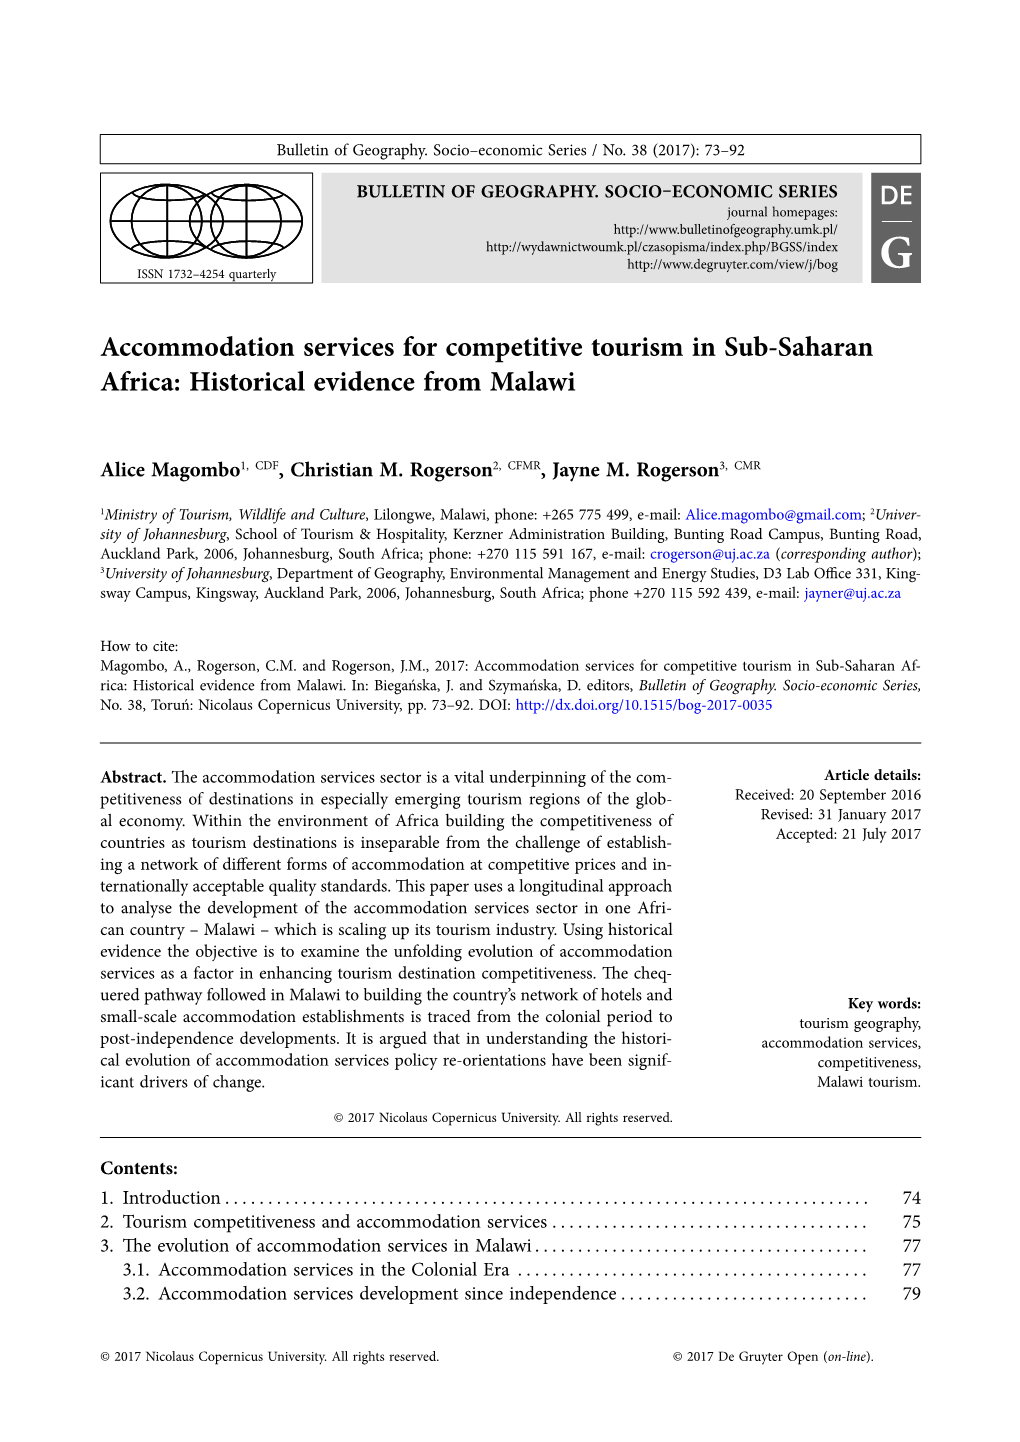 Accommodation Services for Competitive Tourism in Sub-Saharan Africa: Historical Evidence from Malawi